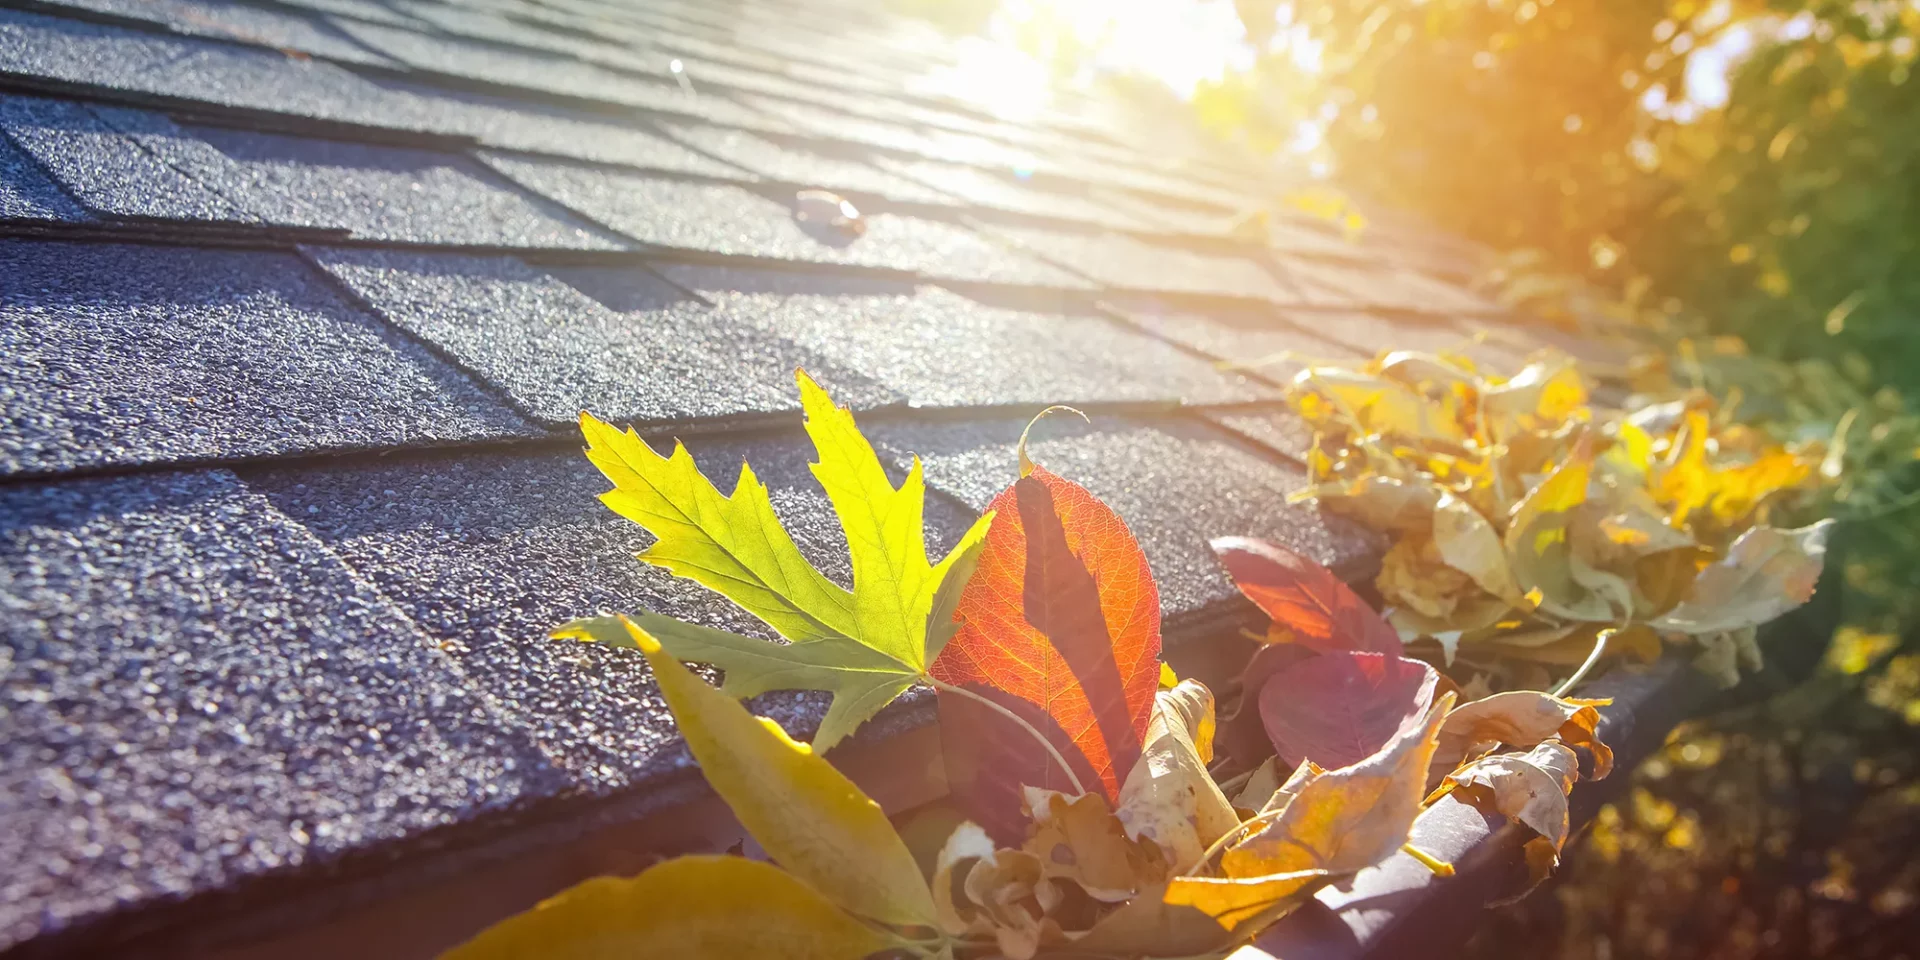 Roof Maintenance Tips For Fall - Gutters